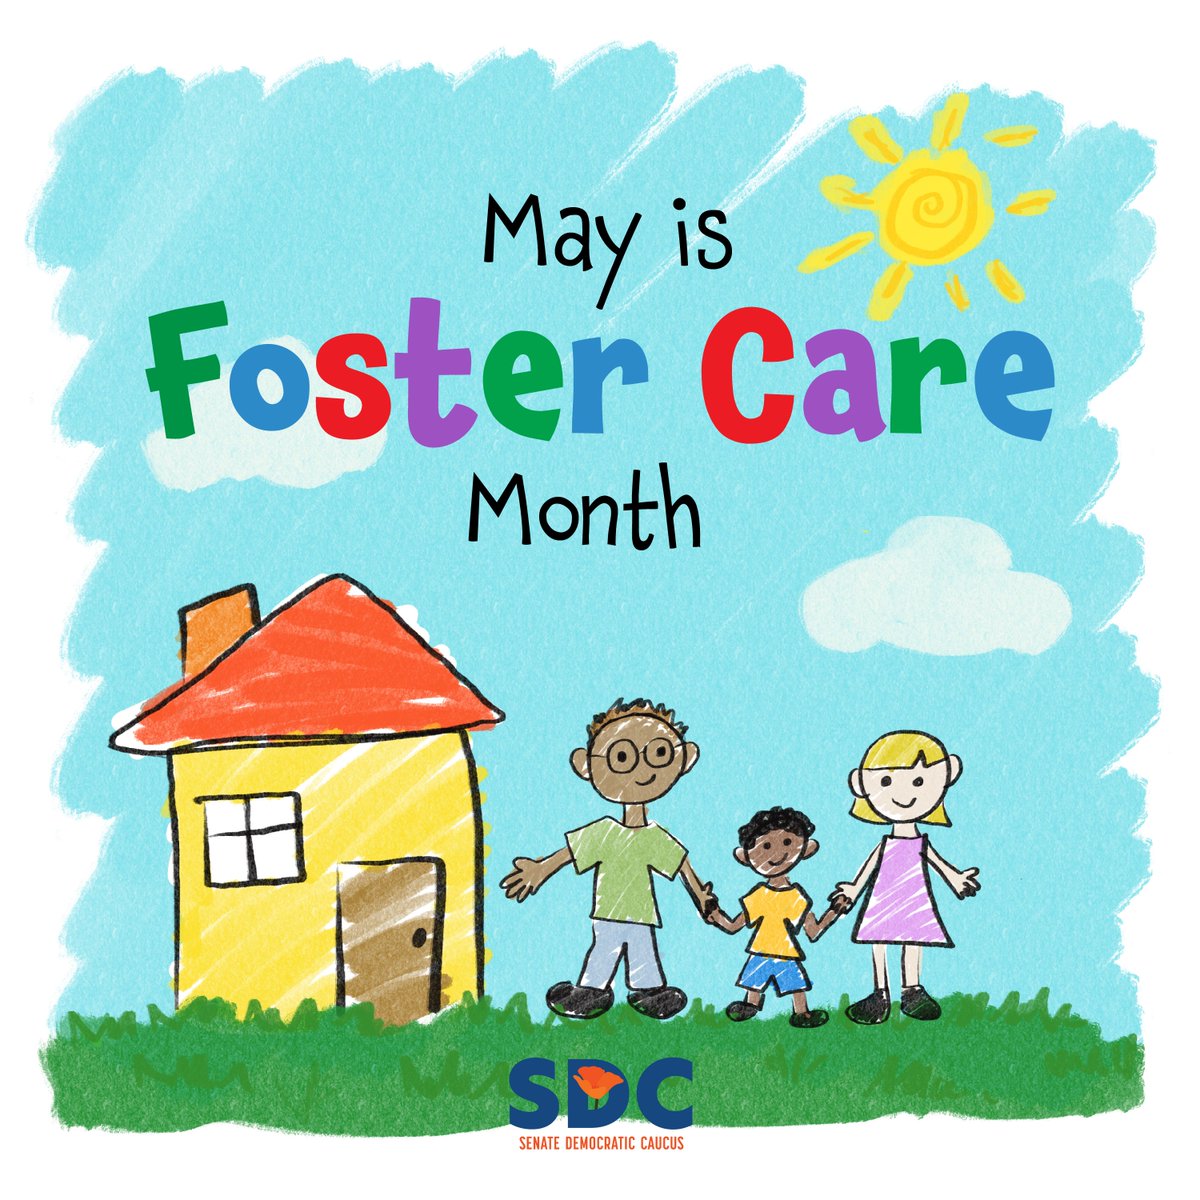 Across the U.S., there are over 390,000 youth in foster care. Each May - for Foster Care Month - it's important to raise awareness of issues related to foster care. Visit childwelfare.gov for more info. #FosterCareMonth #CASenateDems